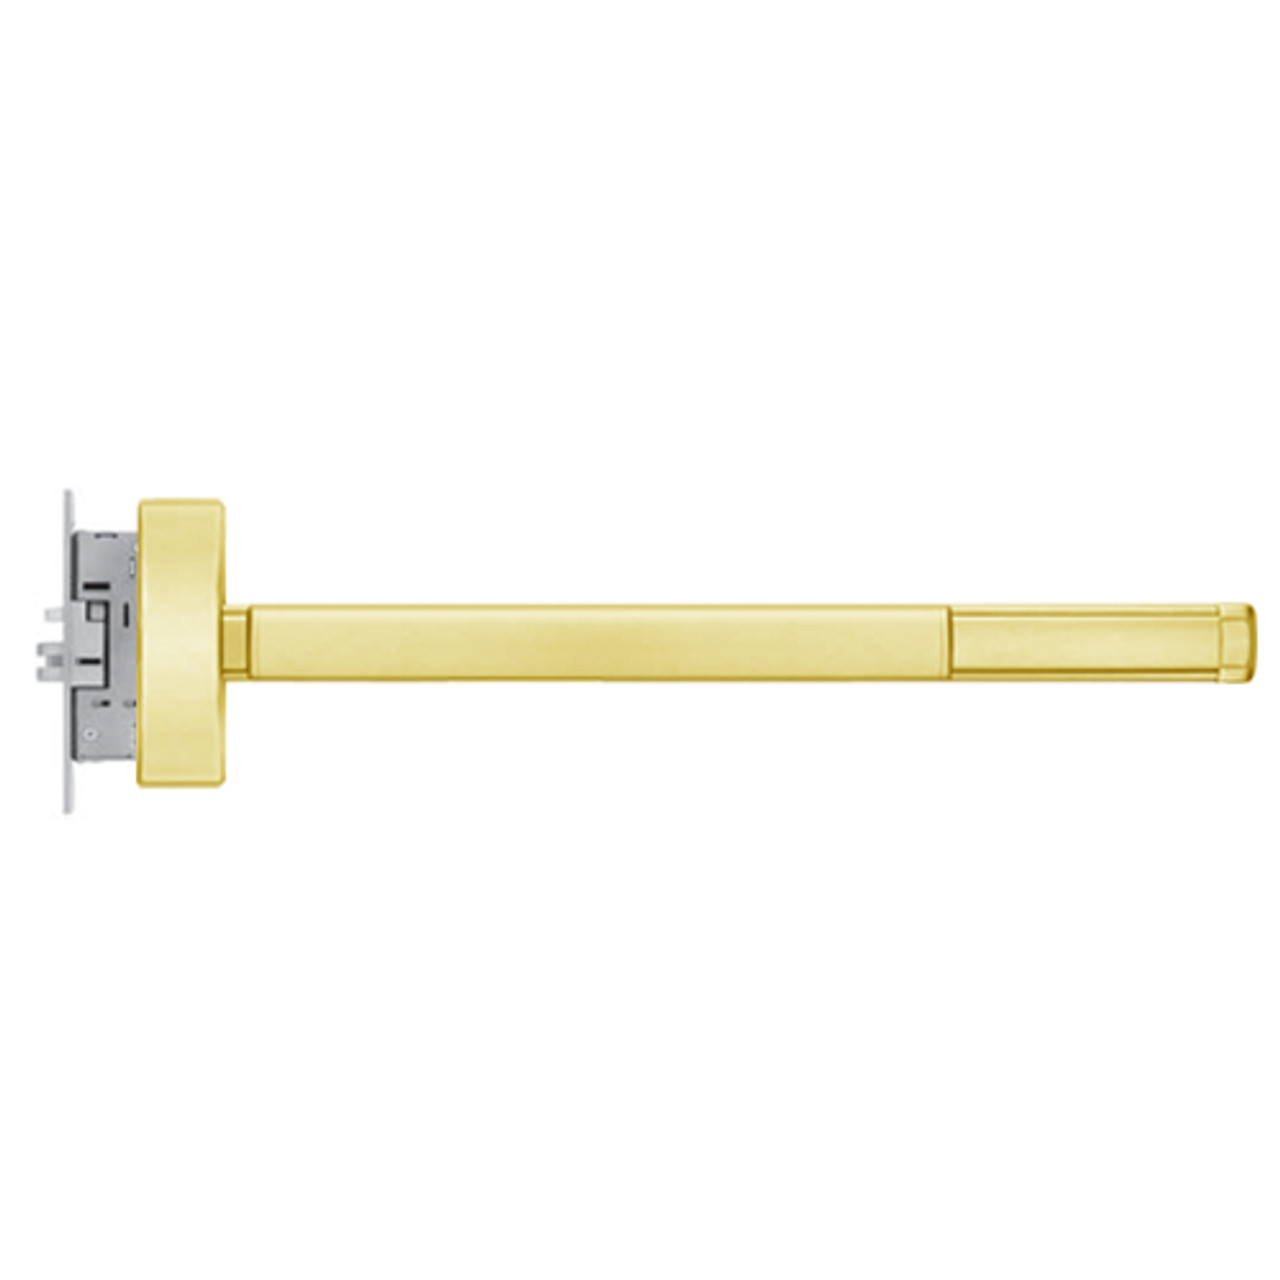 ELR2305-RHR-605-48 PHI 2300 Series Apex Mortise Exit Device with Electric Latch Retraction Prepped for Key Controls Thumb Piece in Bright Brass Finish